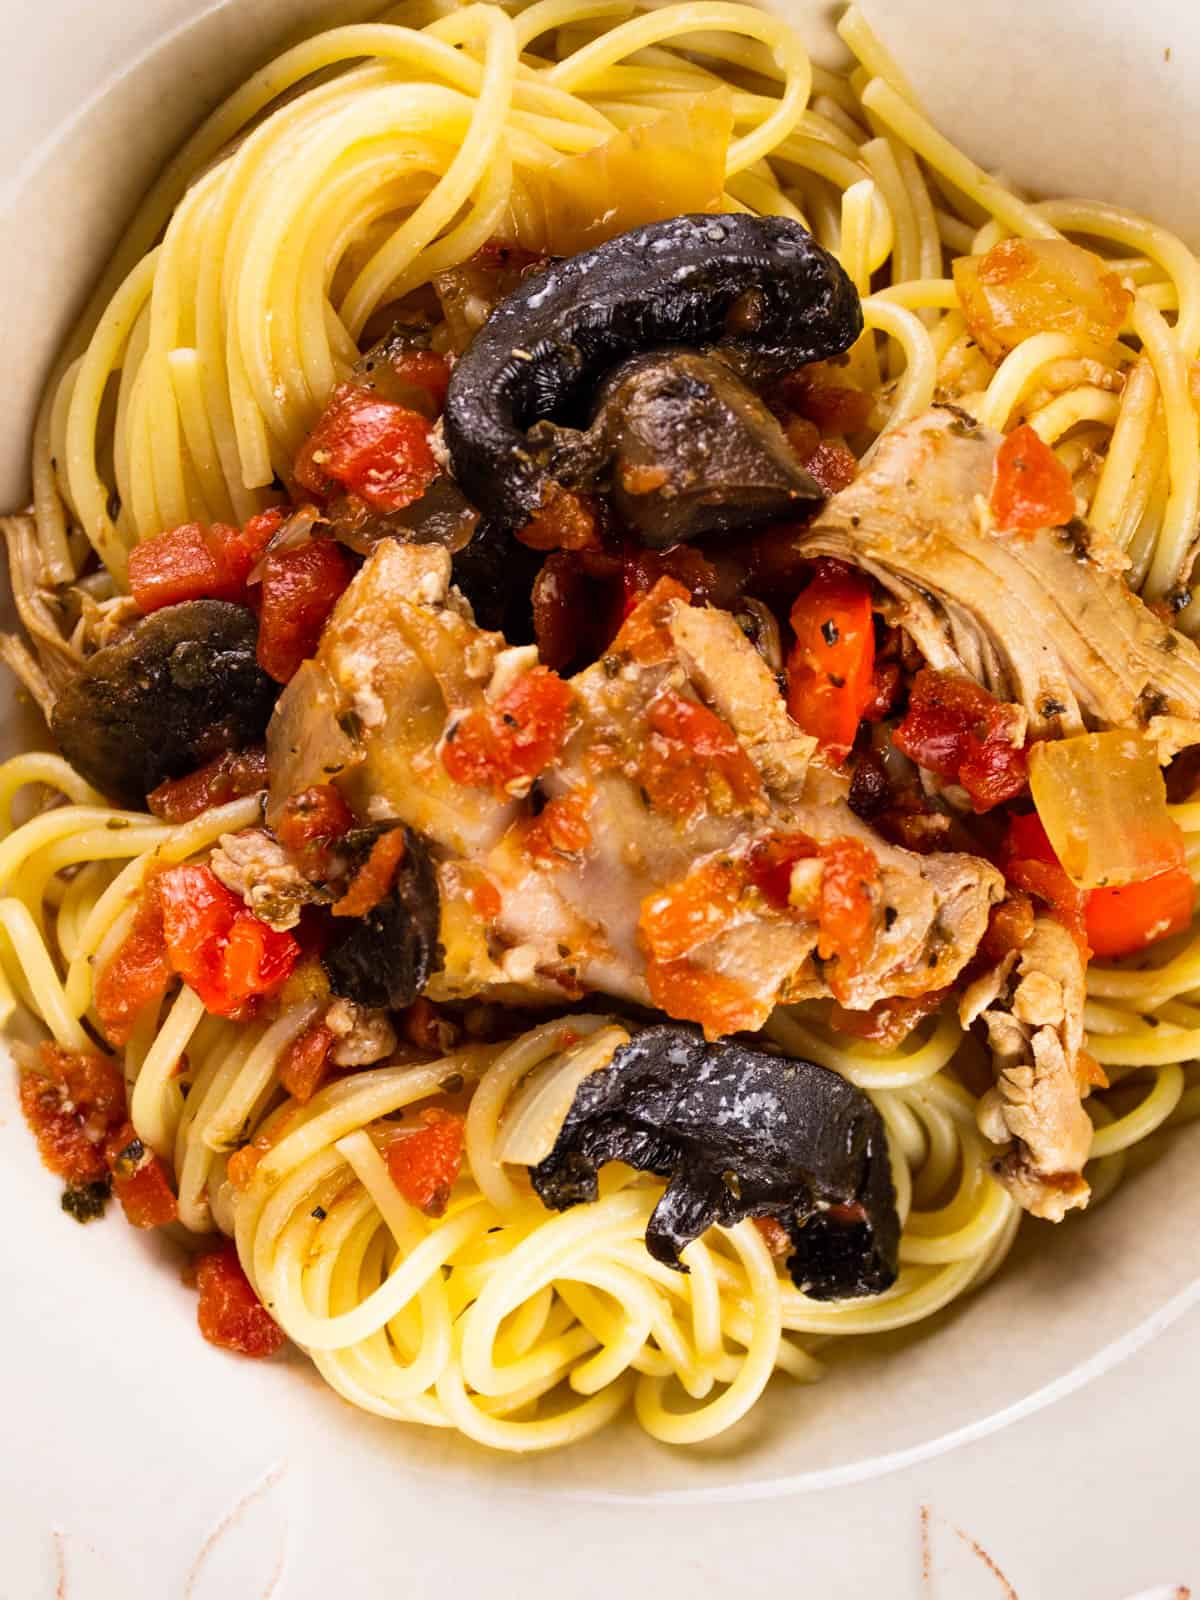 chicken with mushrooms, peppers, onions and tomatoes on spaghetti in a bowl.